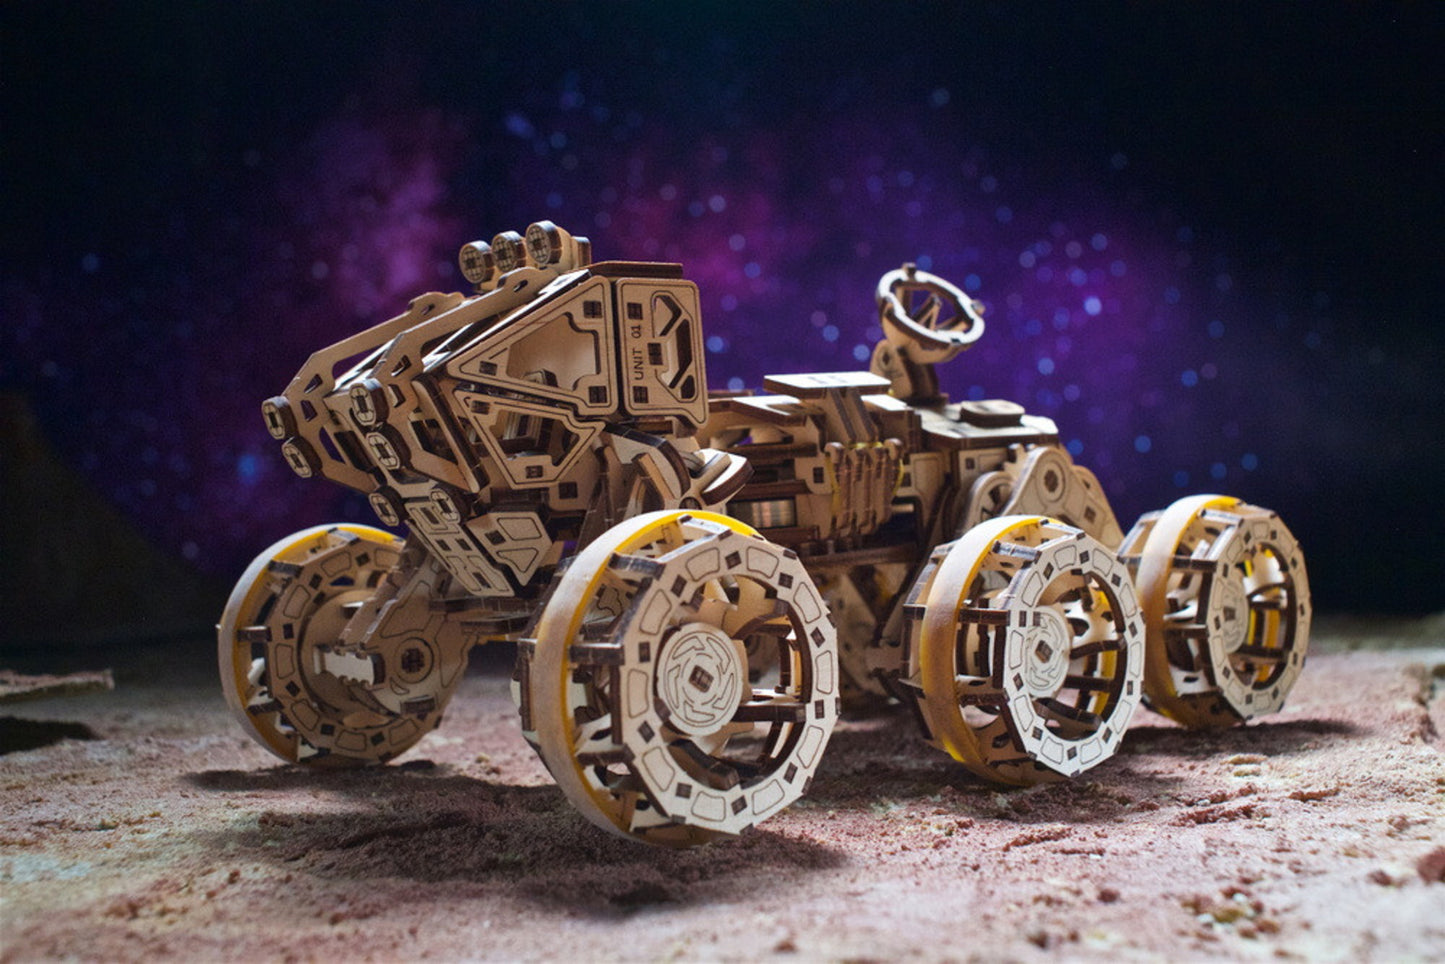 Manned Mars Rover